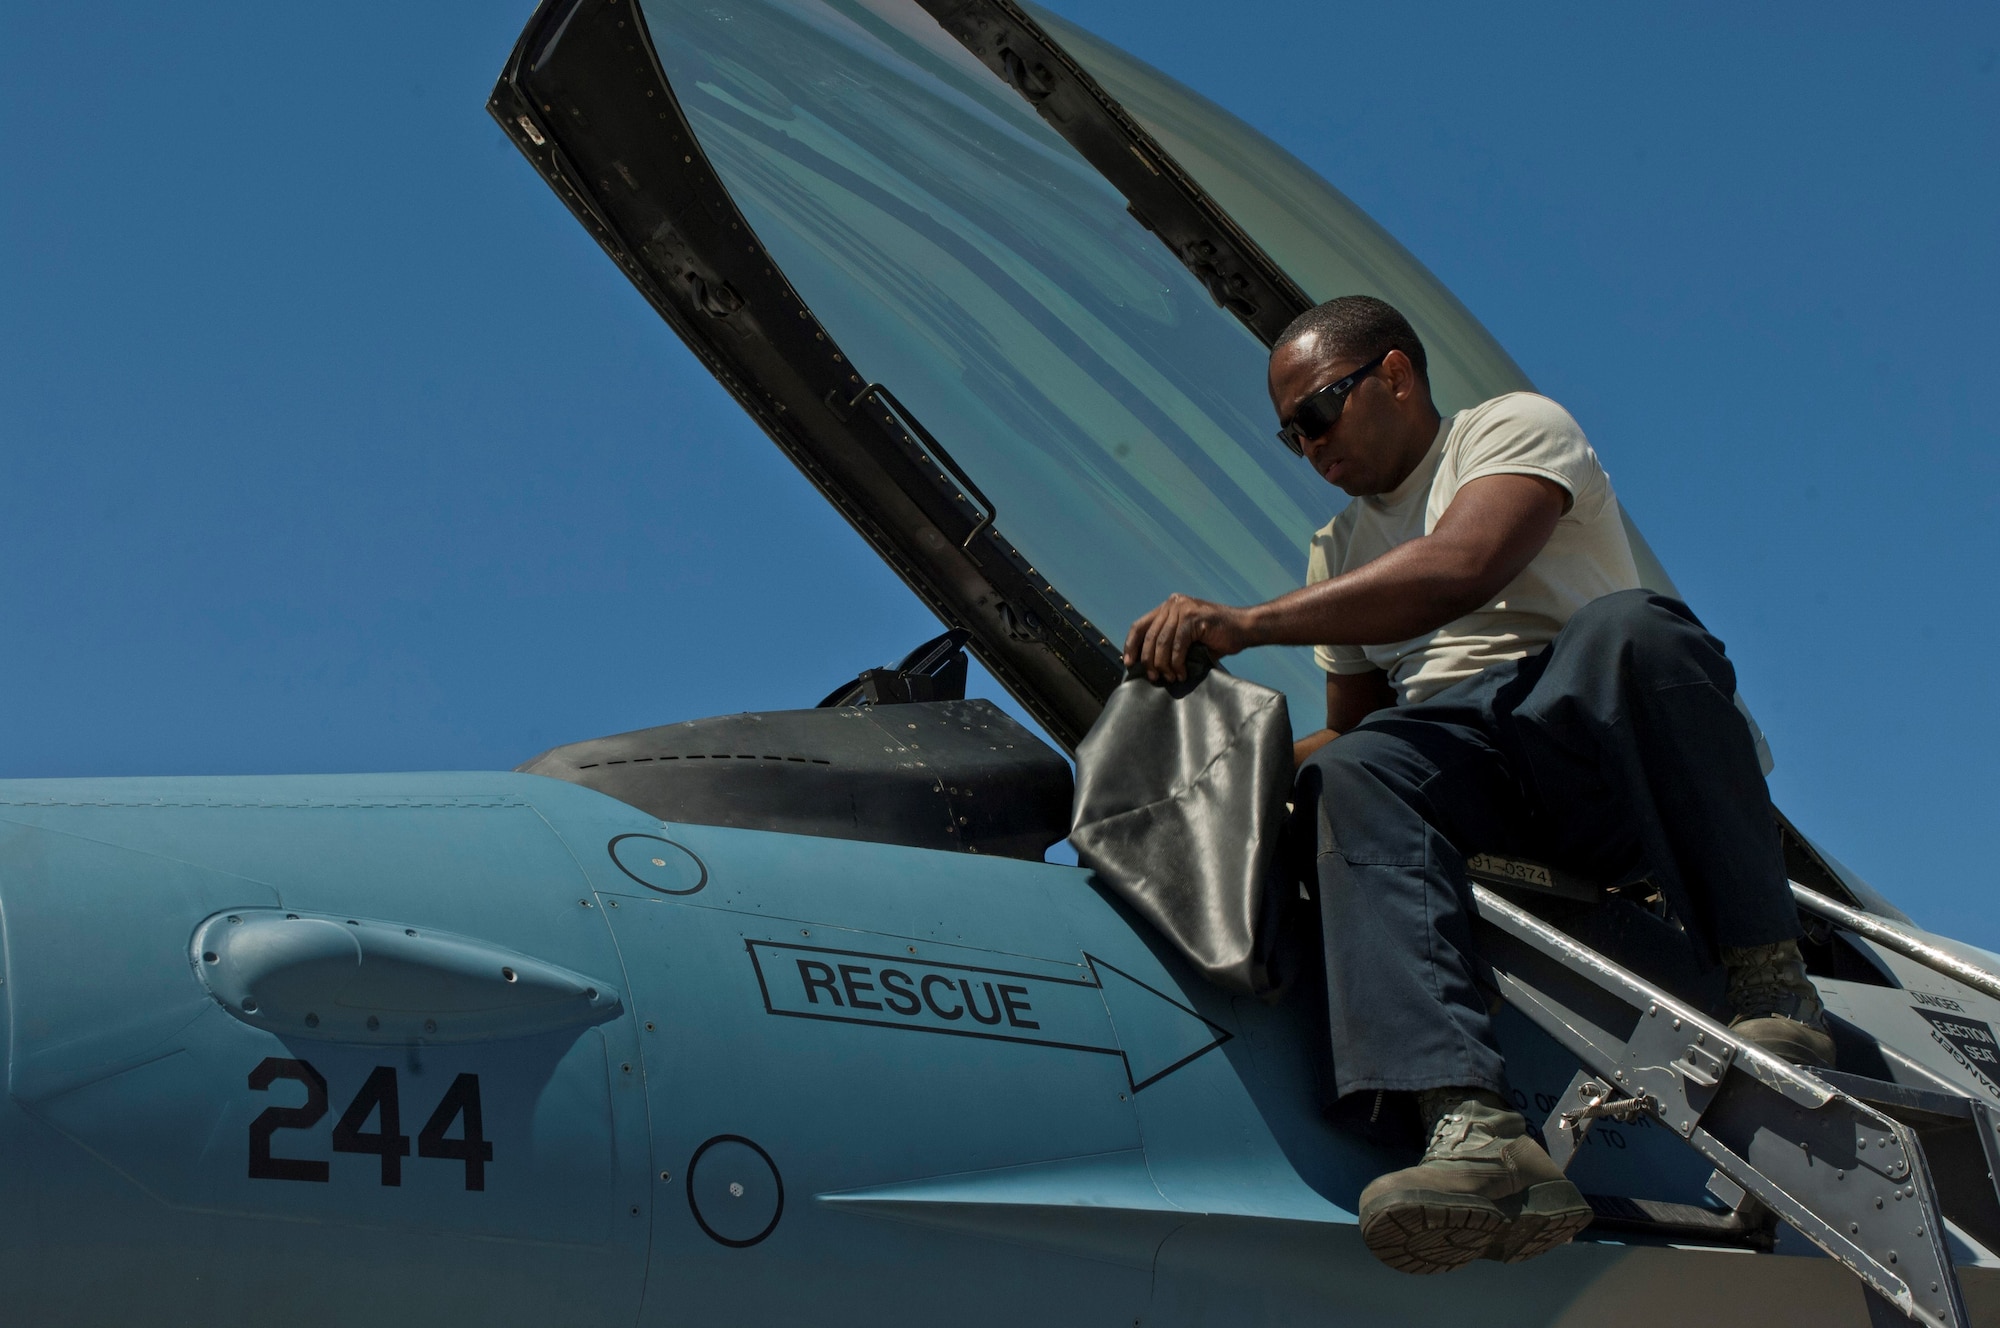 Staff Sgt. Terrance Harris prepares a 64th Aggressor Squadron F-16 Fighting Falcon cockpit before a training flight Aug. 13, 2013, at Nellis Air Force Base, Nev. Before each flight, the crew chief prepares the cockpit and ensures the pilot is strapped in safely. Harris is a crew chief assigned to the 57th Maintenance Squadron. (U.S. Air Force photo/Airman 1st Class Joshua Kleinholz)

